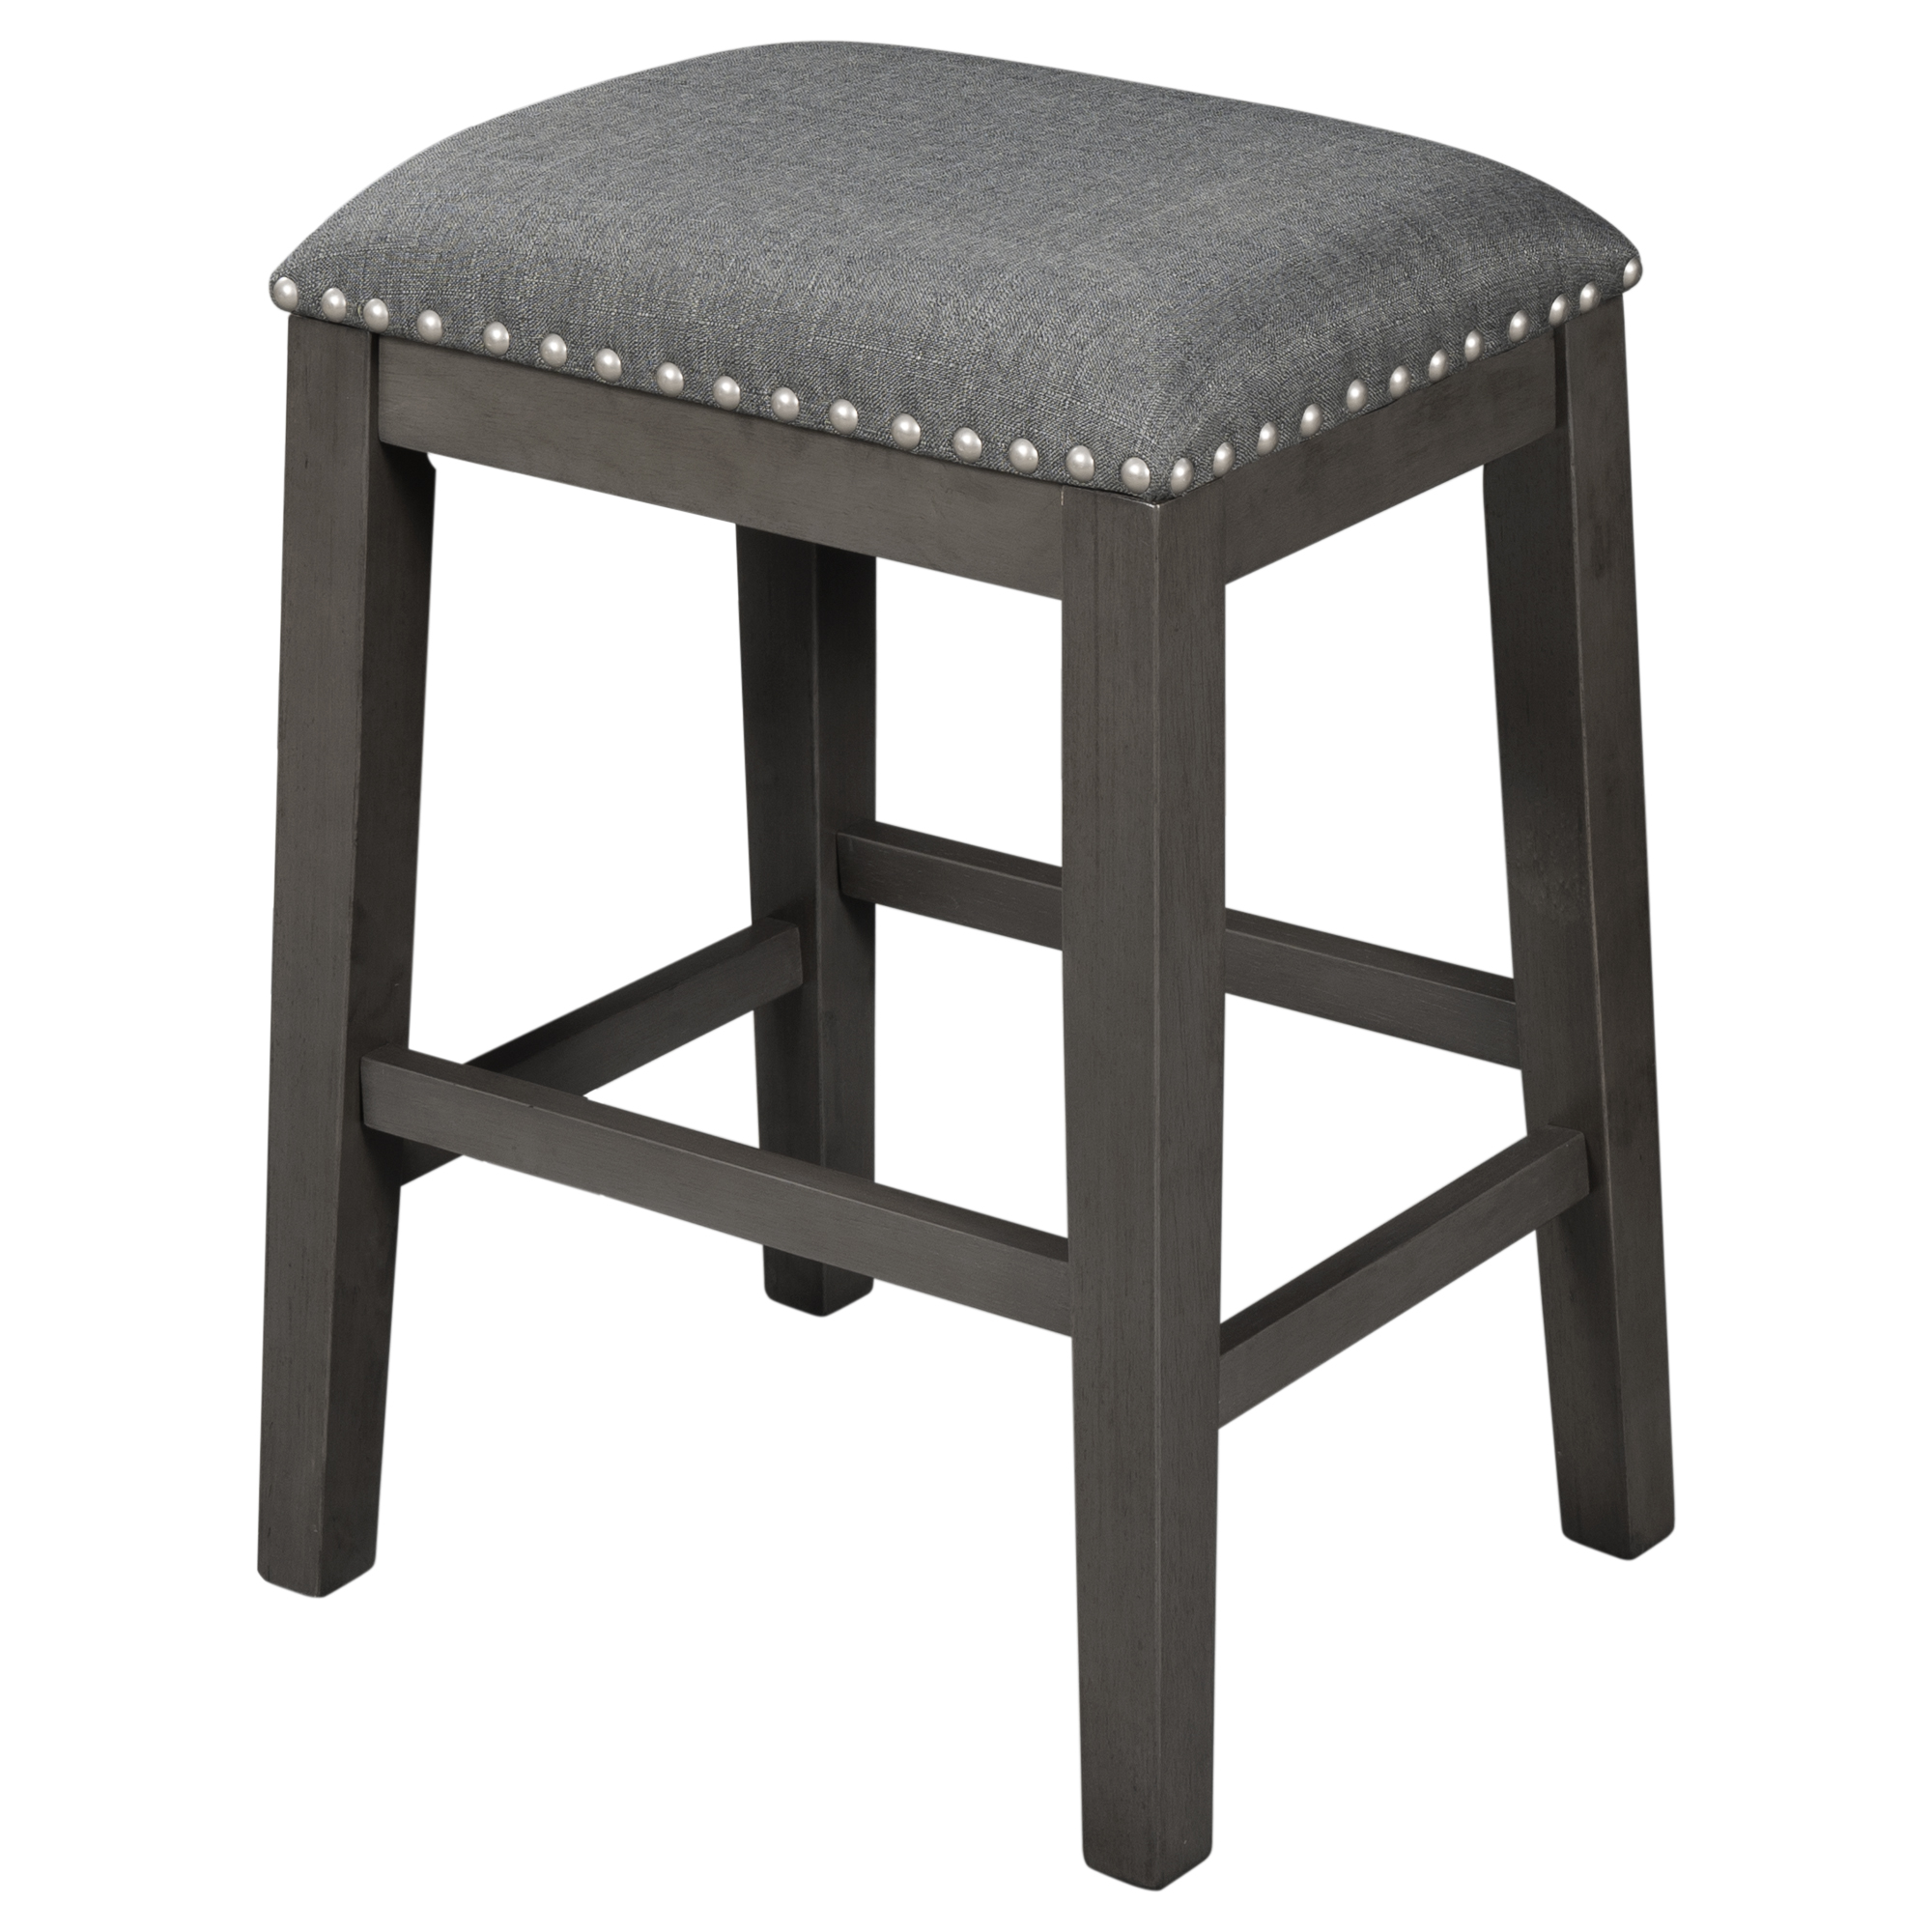 Rustic Farmhouse Dining Room Wooden Stools with Trim, Set of 2 (Gray)-Boyel Living